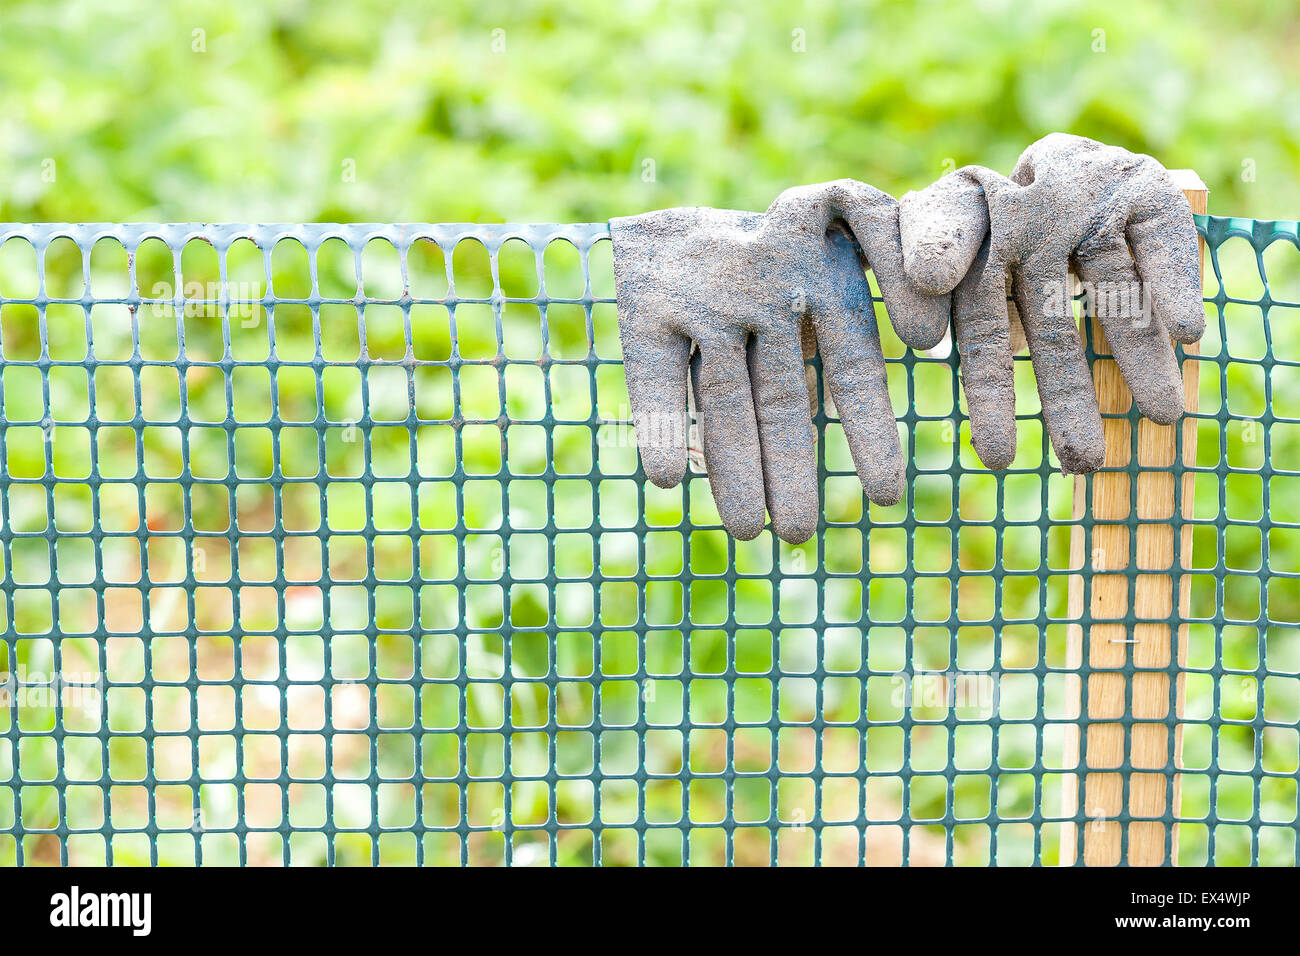 Dirty garden gloves on a plastic fence, gardening concept, shallow depth of field. Stock Photo